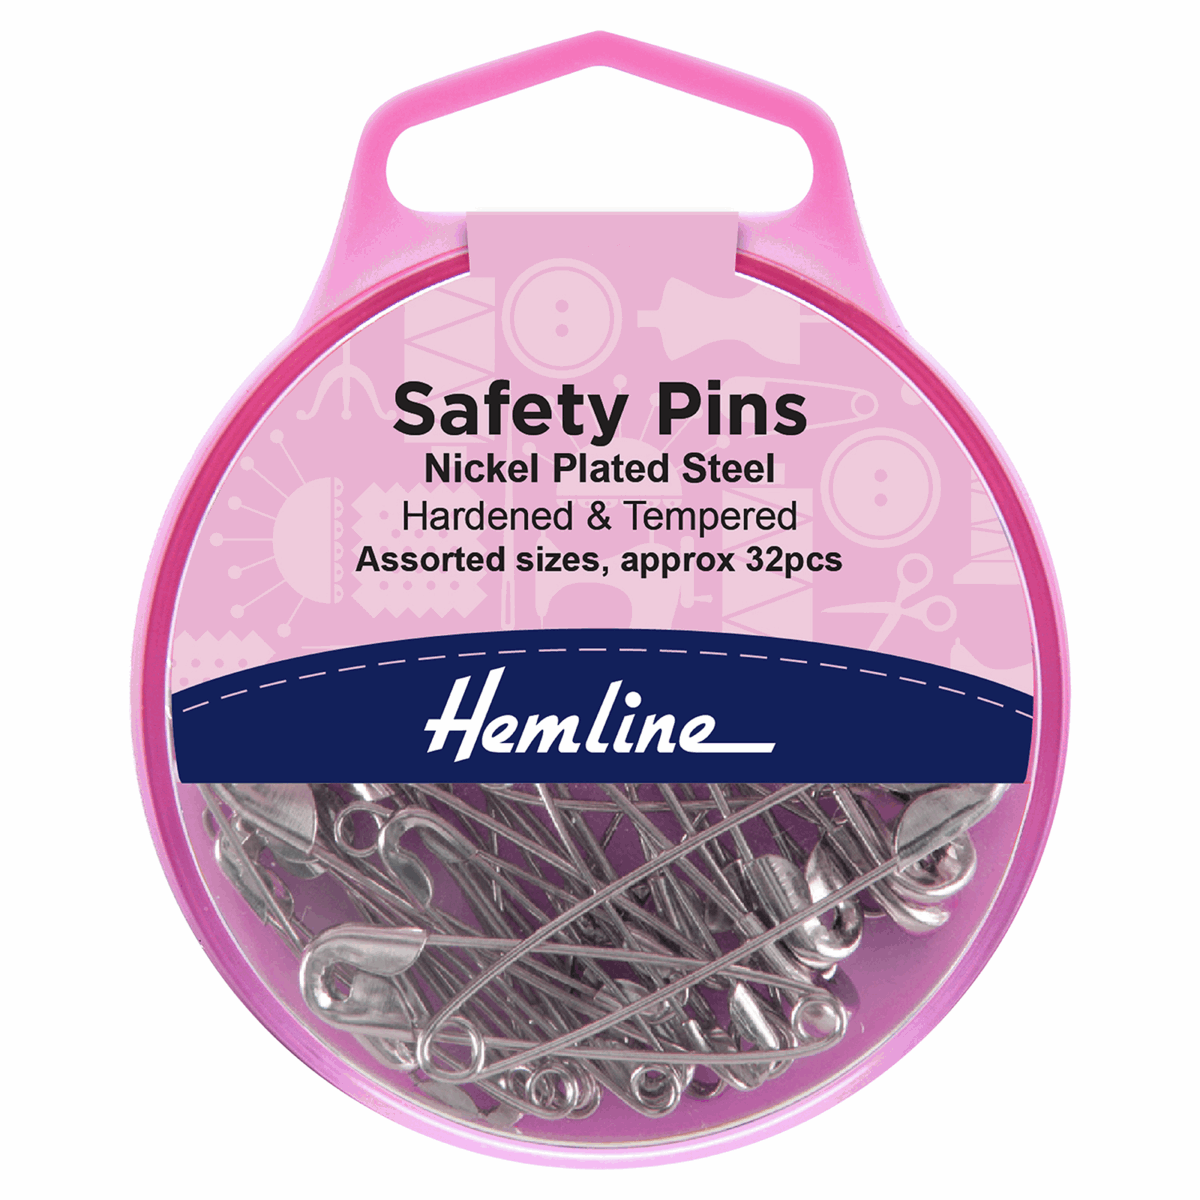 Safety Pins Nickel Plated Steel